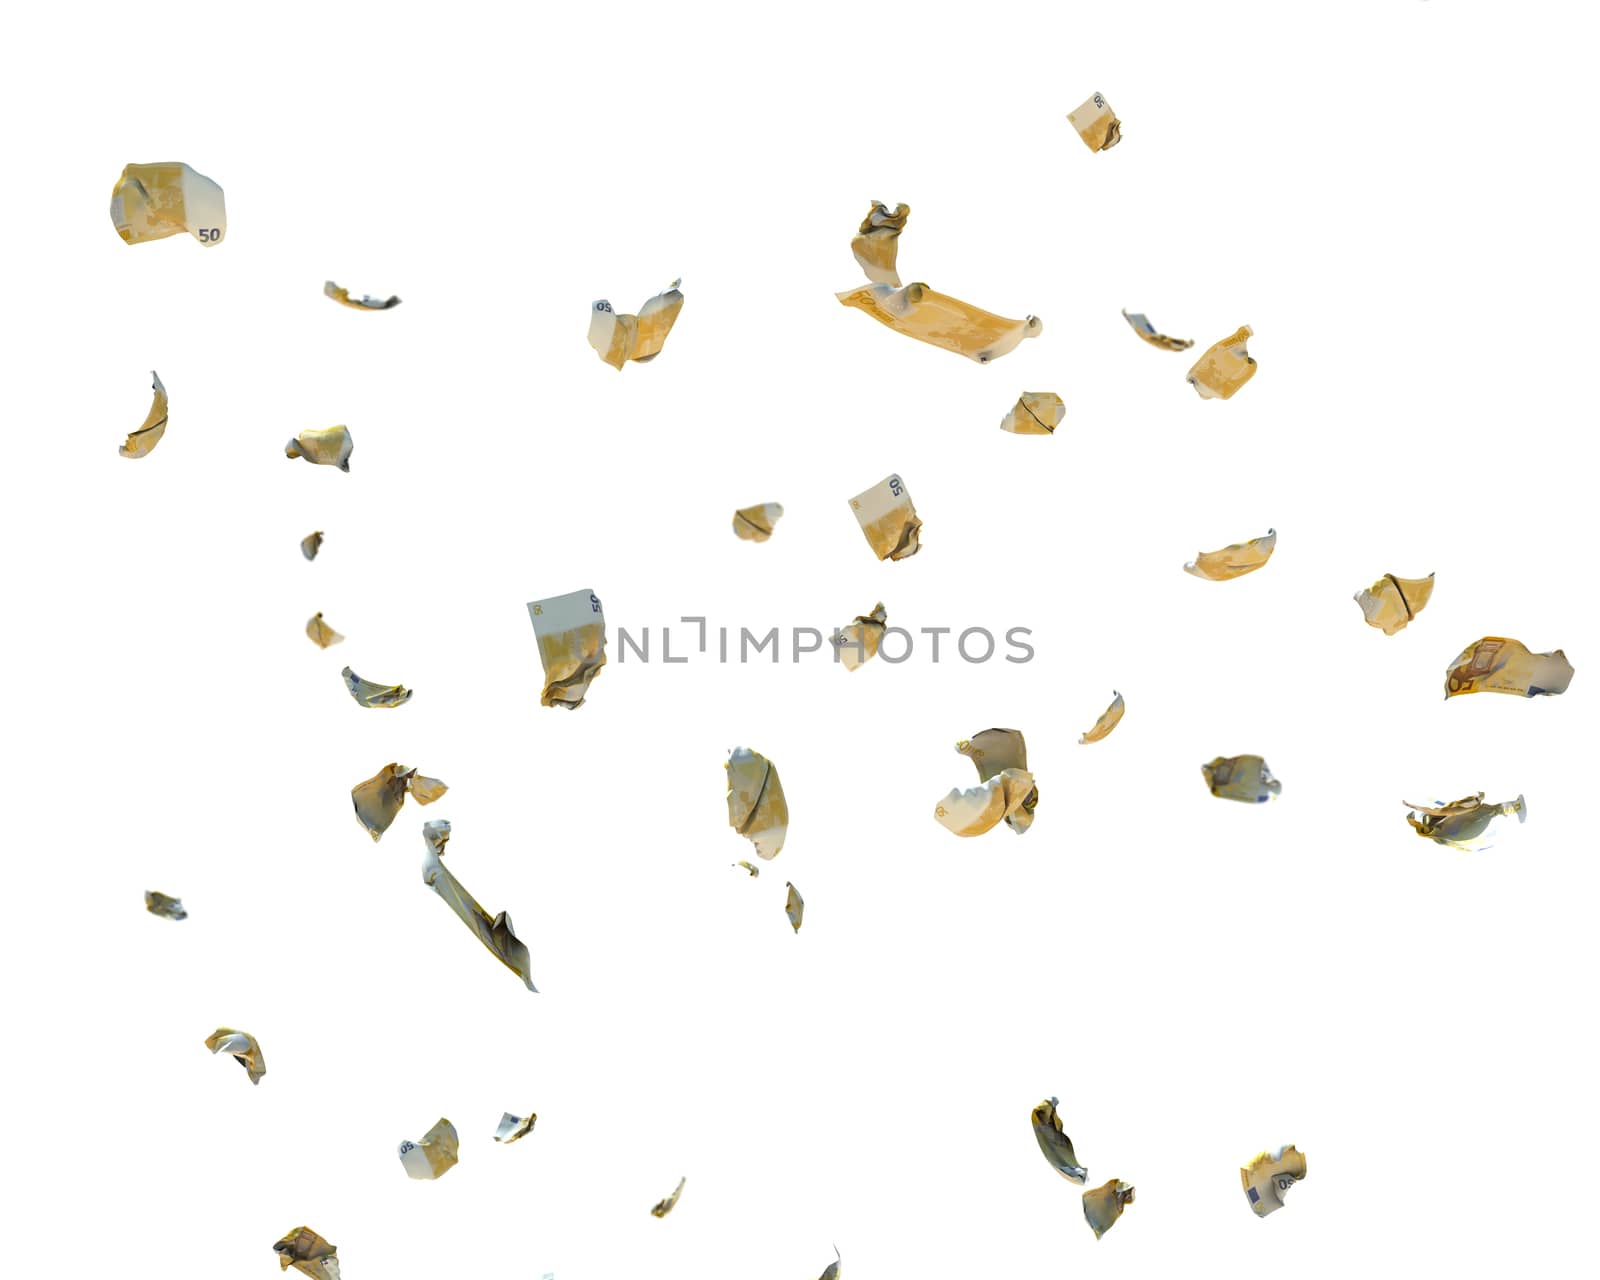 50 Euro Currency Crumpled Banknotes flying, against white, clipping path included